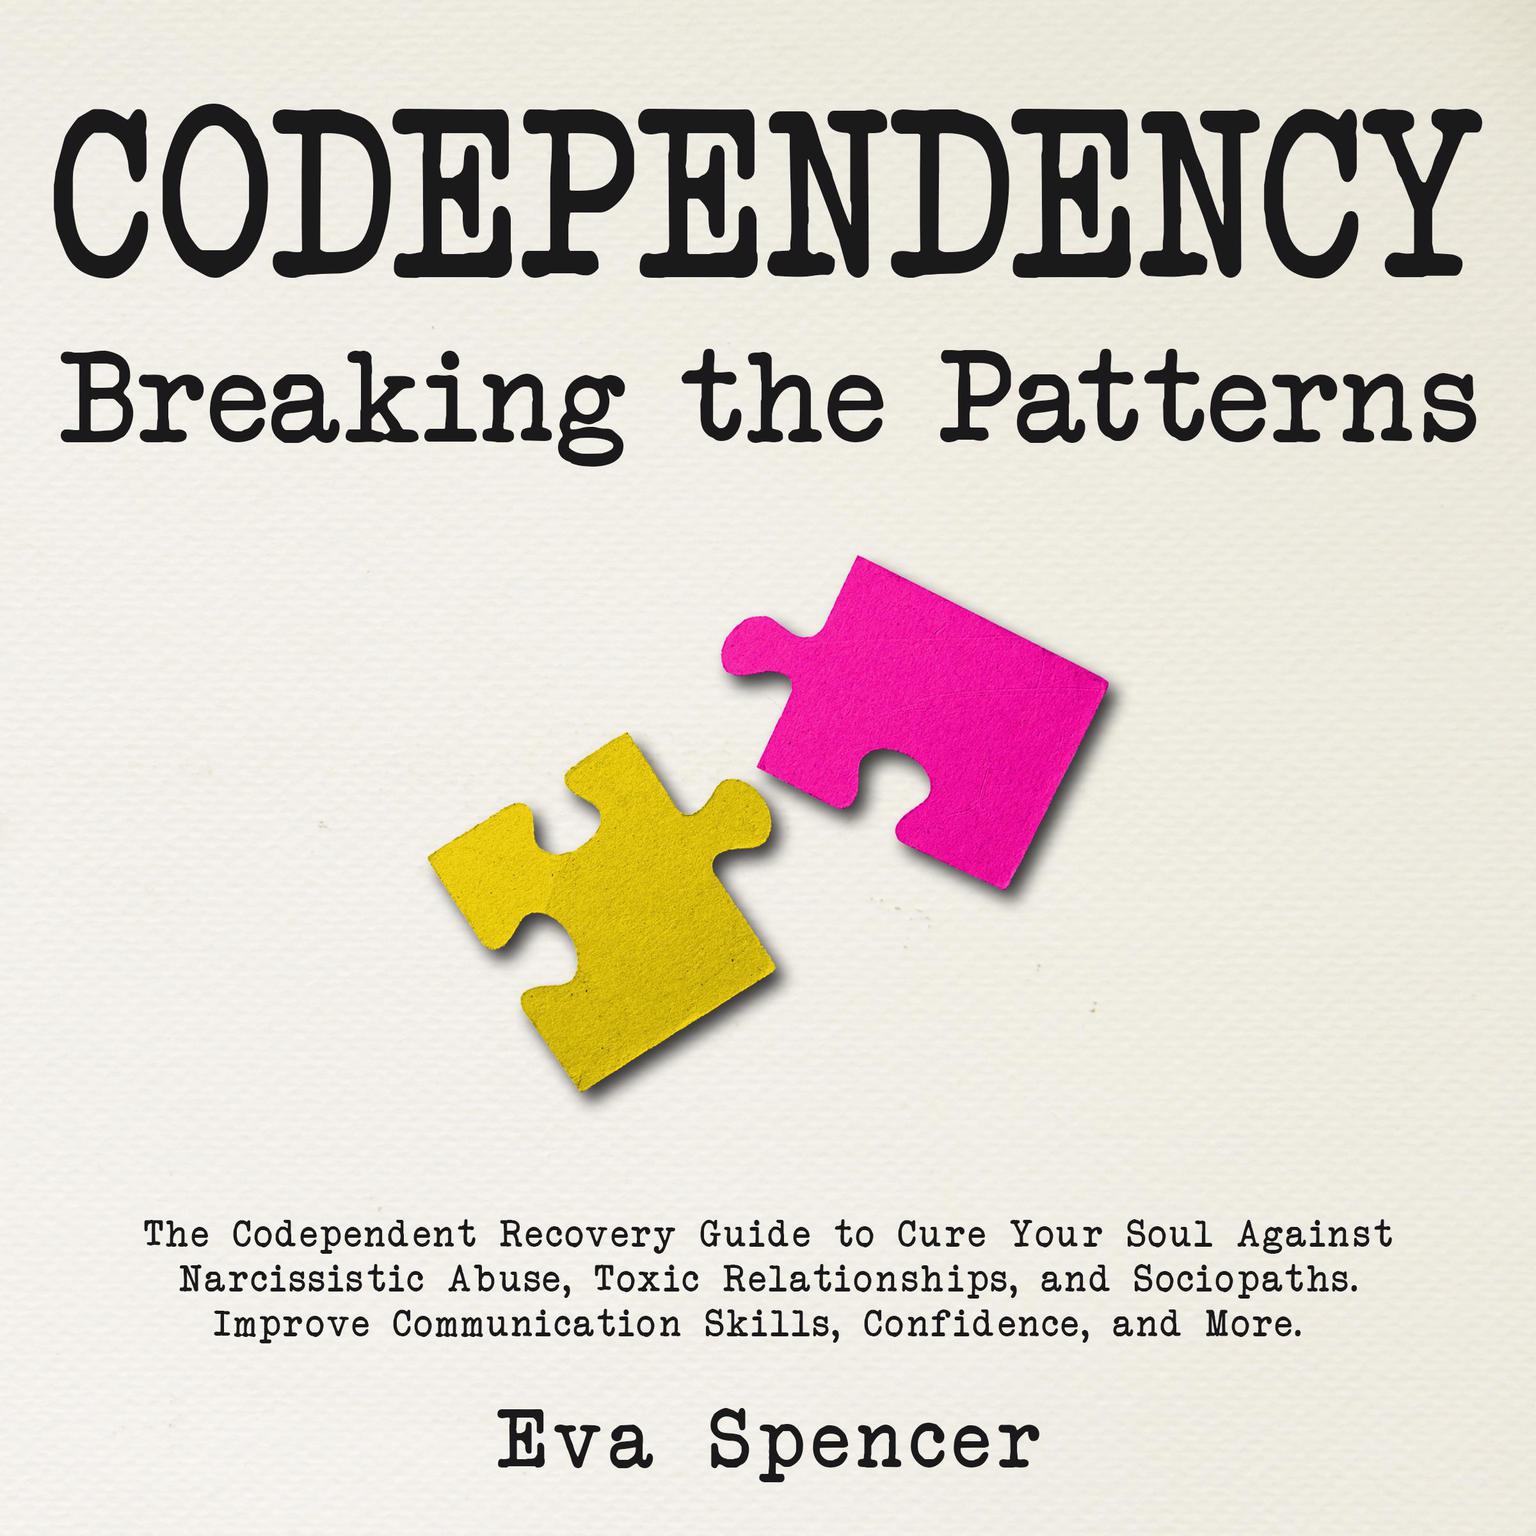 Codependency Breaking the Patterns: The Codependent Recovery Guide to Cure Your Soul Against Narcissistic Abuse, Toxic Relationships, and Sociopaths. Improve Communication Skills, Confidence, and More. Audiobook, by Eva Spencer